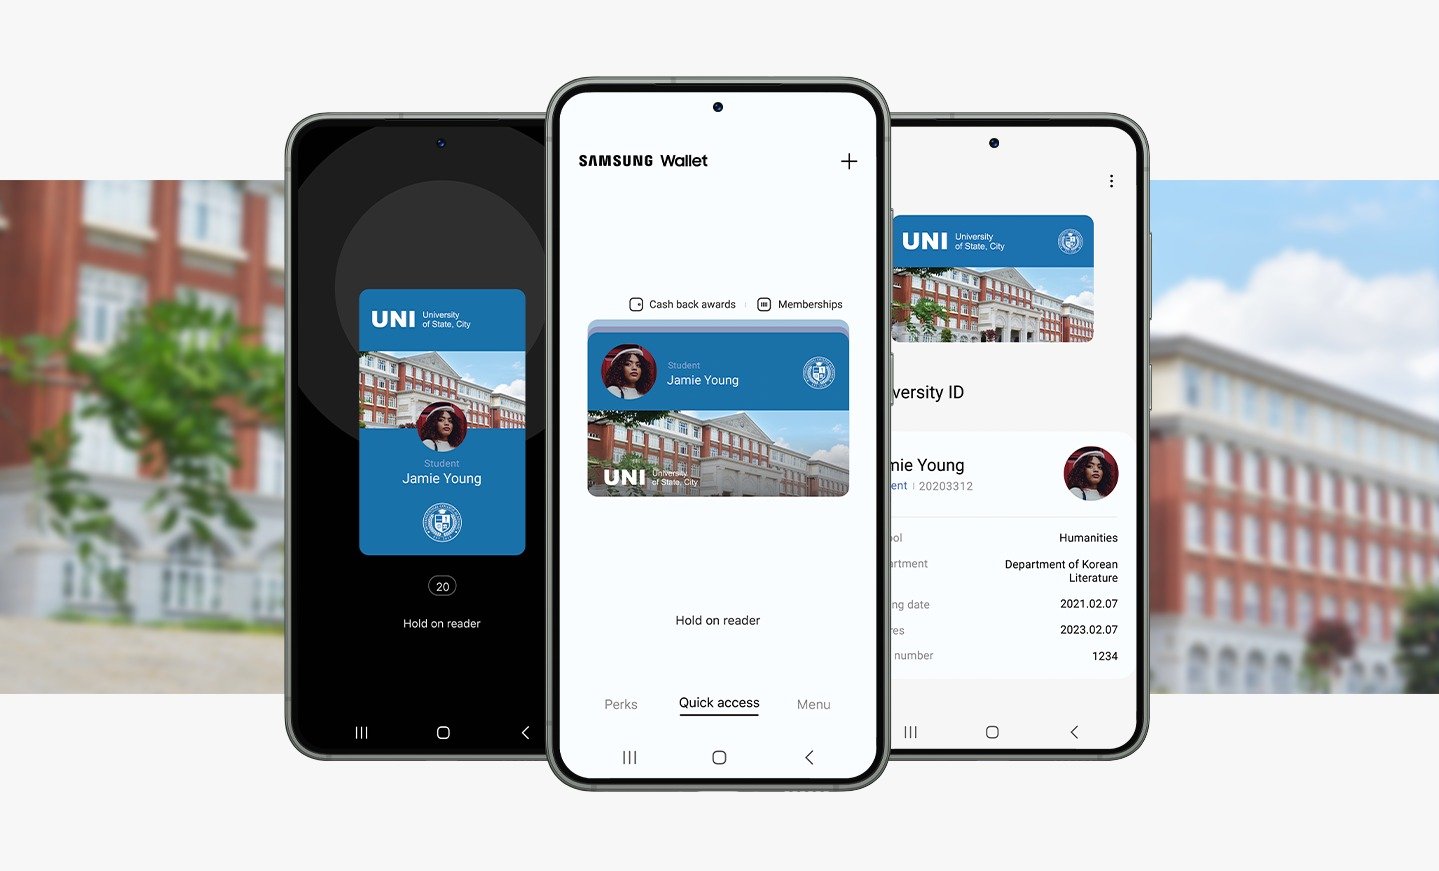 Samsung Wallet Adds Support For Student IDs